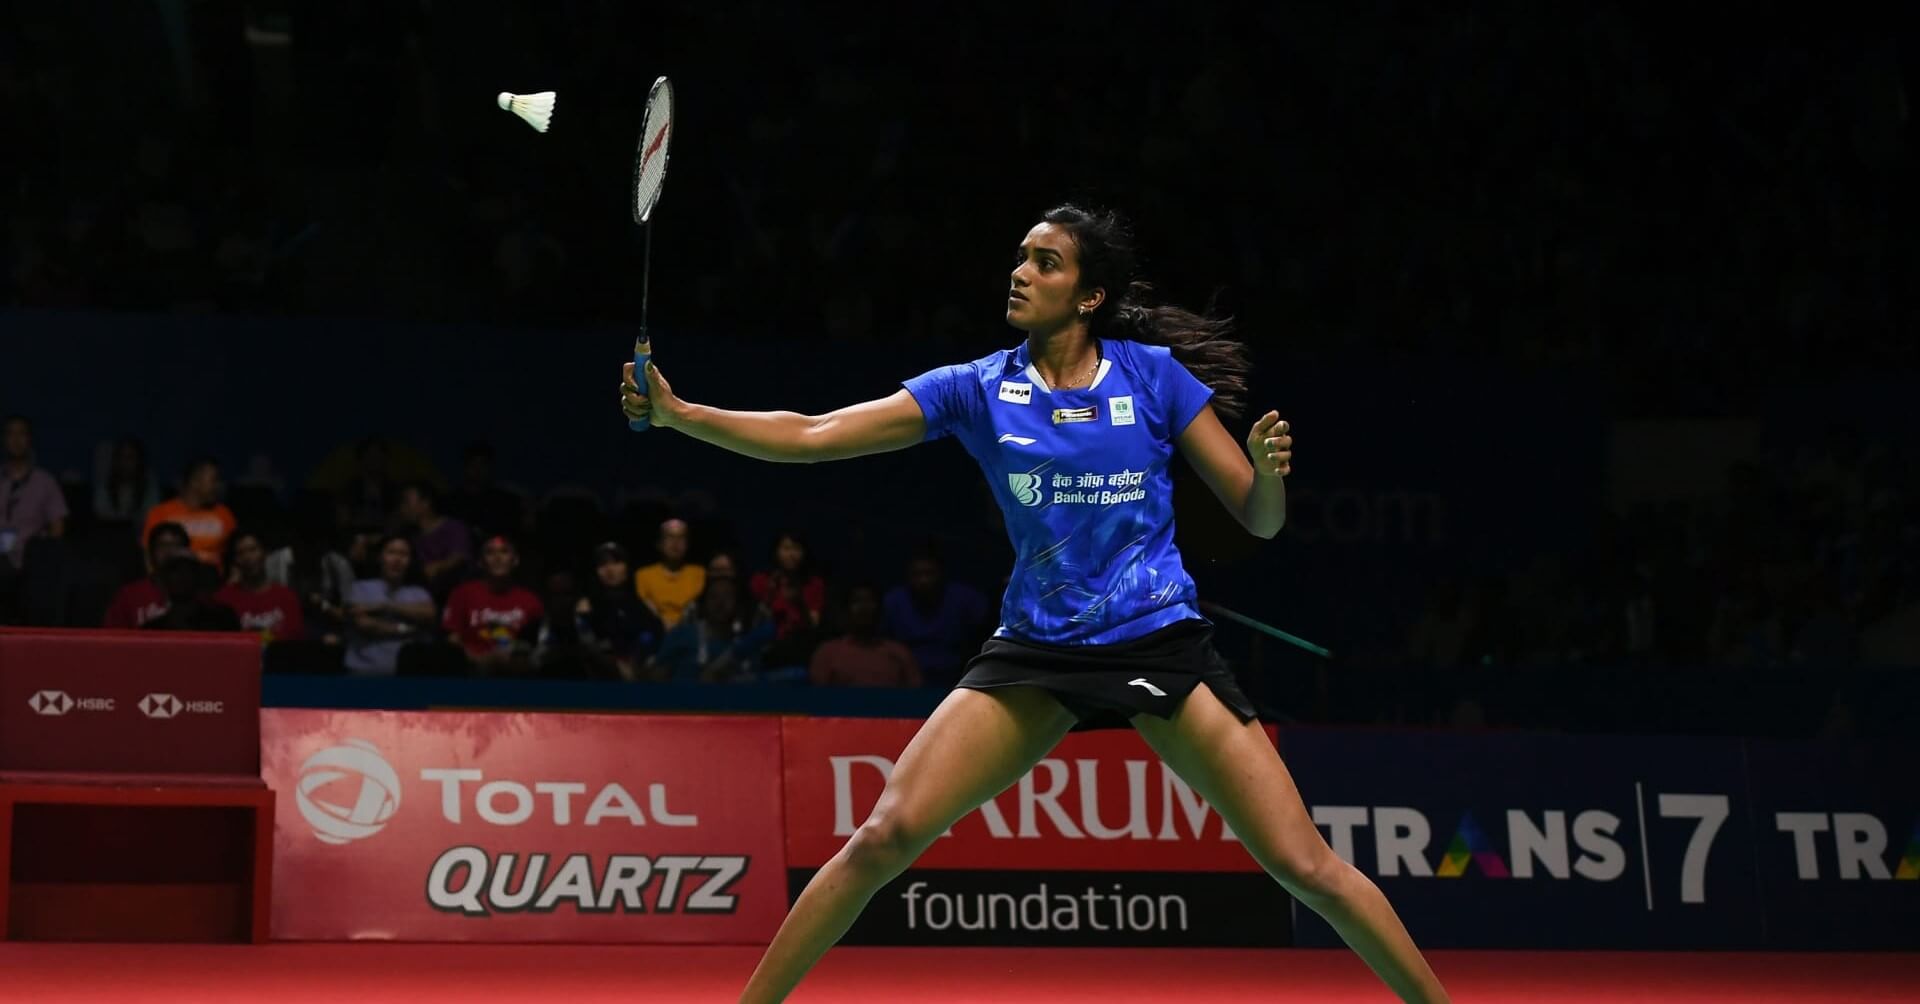 BWF World Tour Finals 2019 All you need to know, schedule, draw, where to watch live